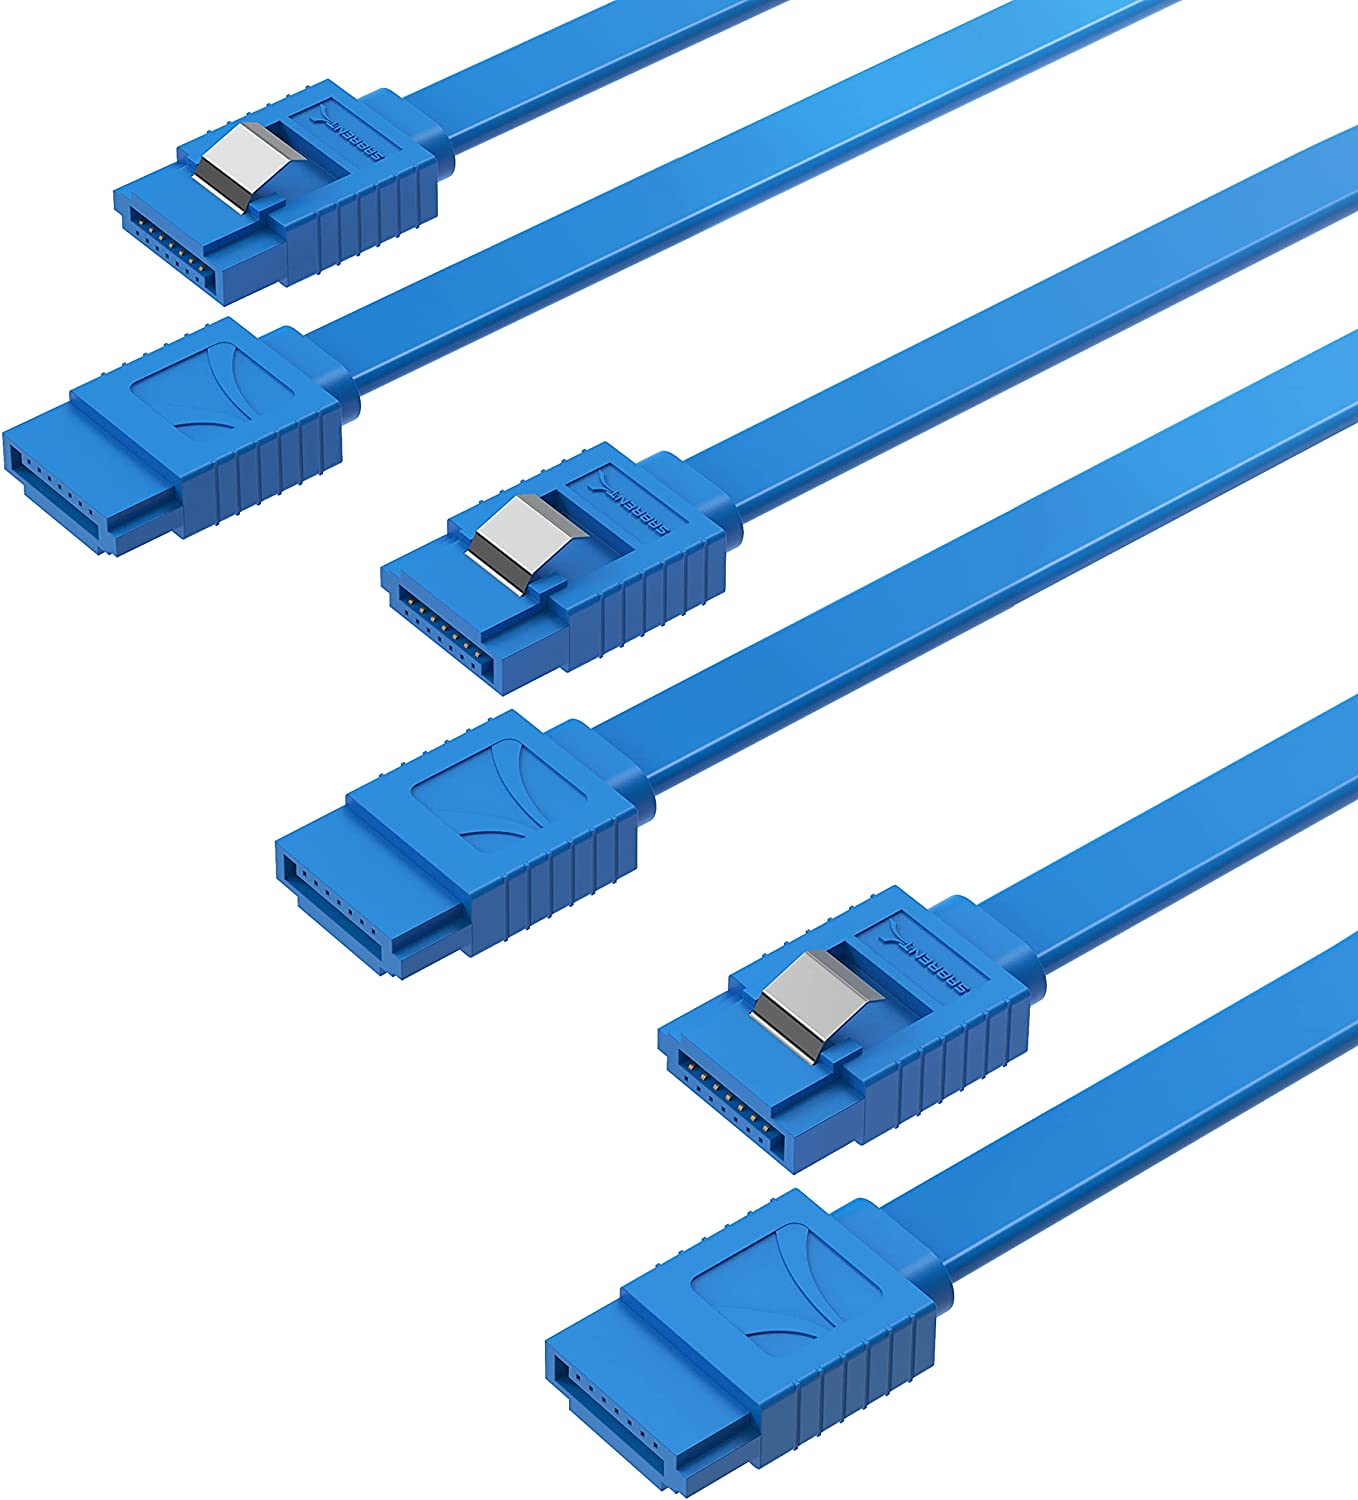 SABRENT SATA III (6 Gbit/s) Straight Data Cable with Locking Latch for HDD/SSD/CD and DVD Drives (3 Pack 20 Inch) in Blue (CB-SFB3)